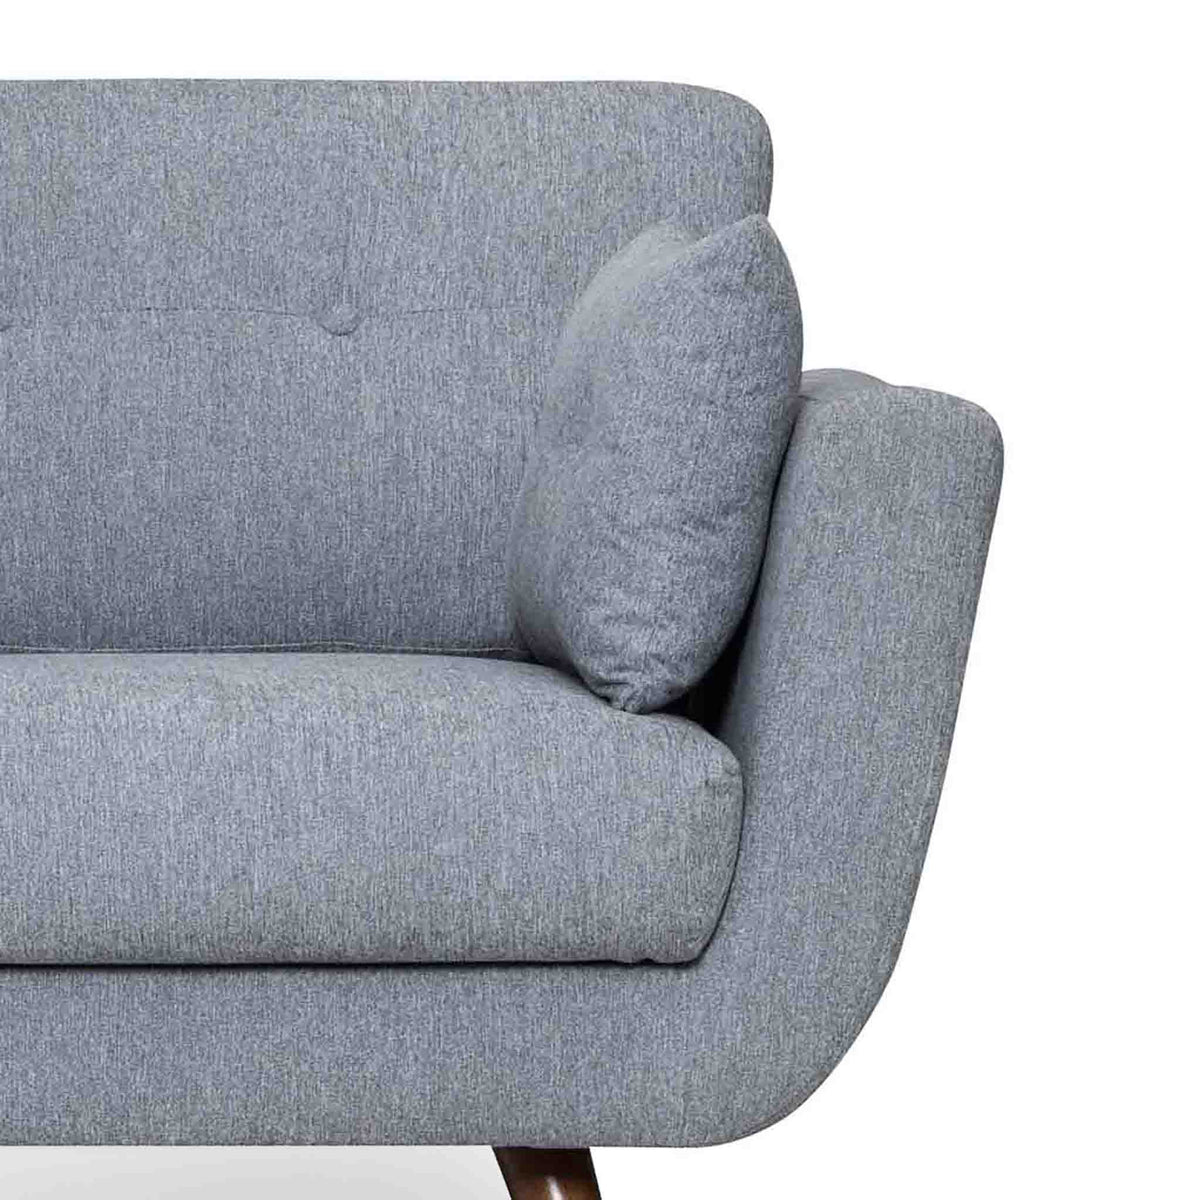 Trom Grey Scandinavian style fabric armchair - Close up of arm rest